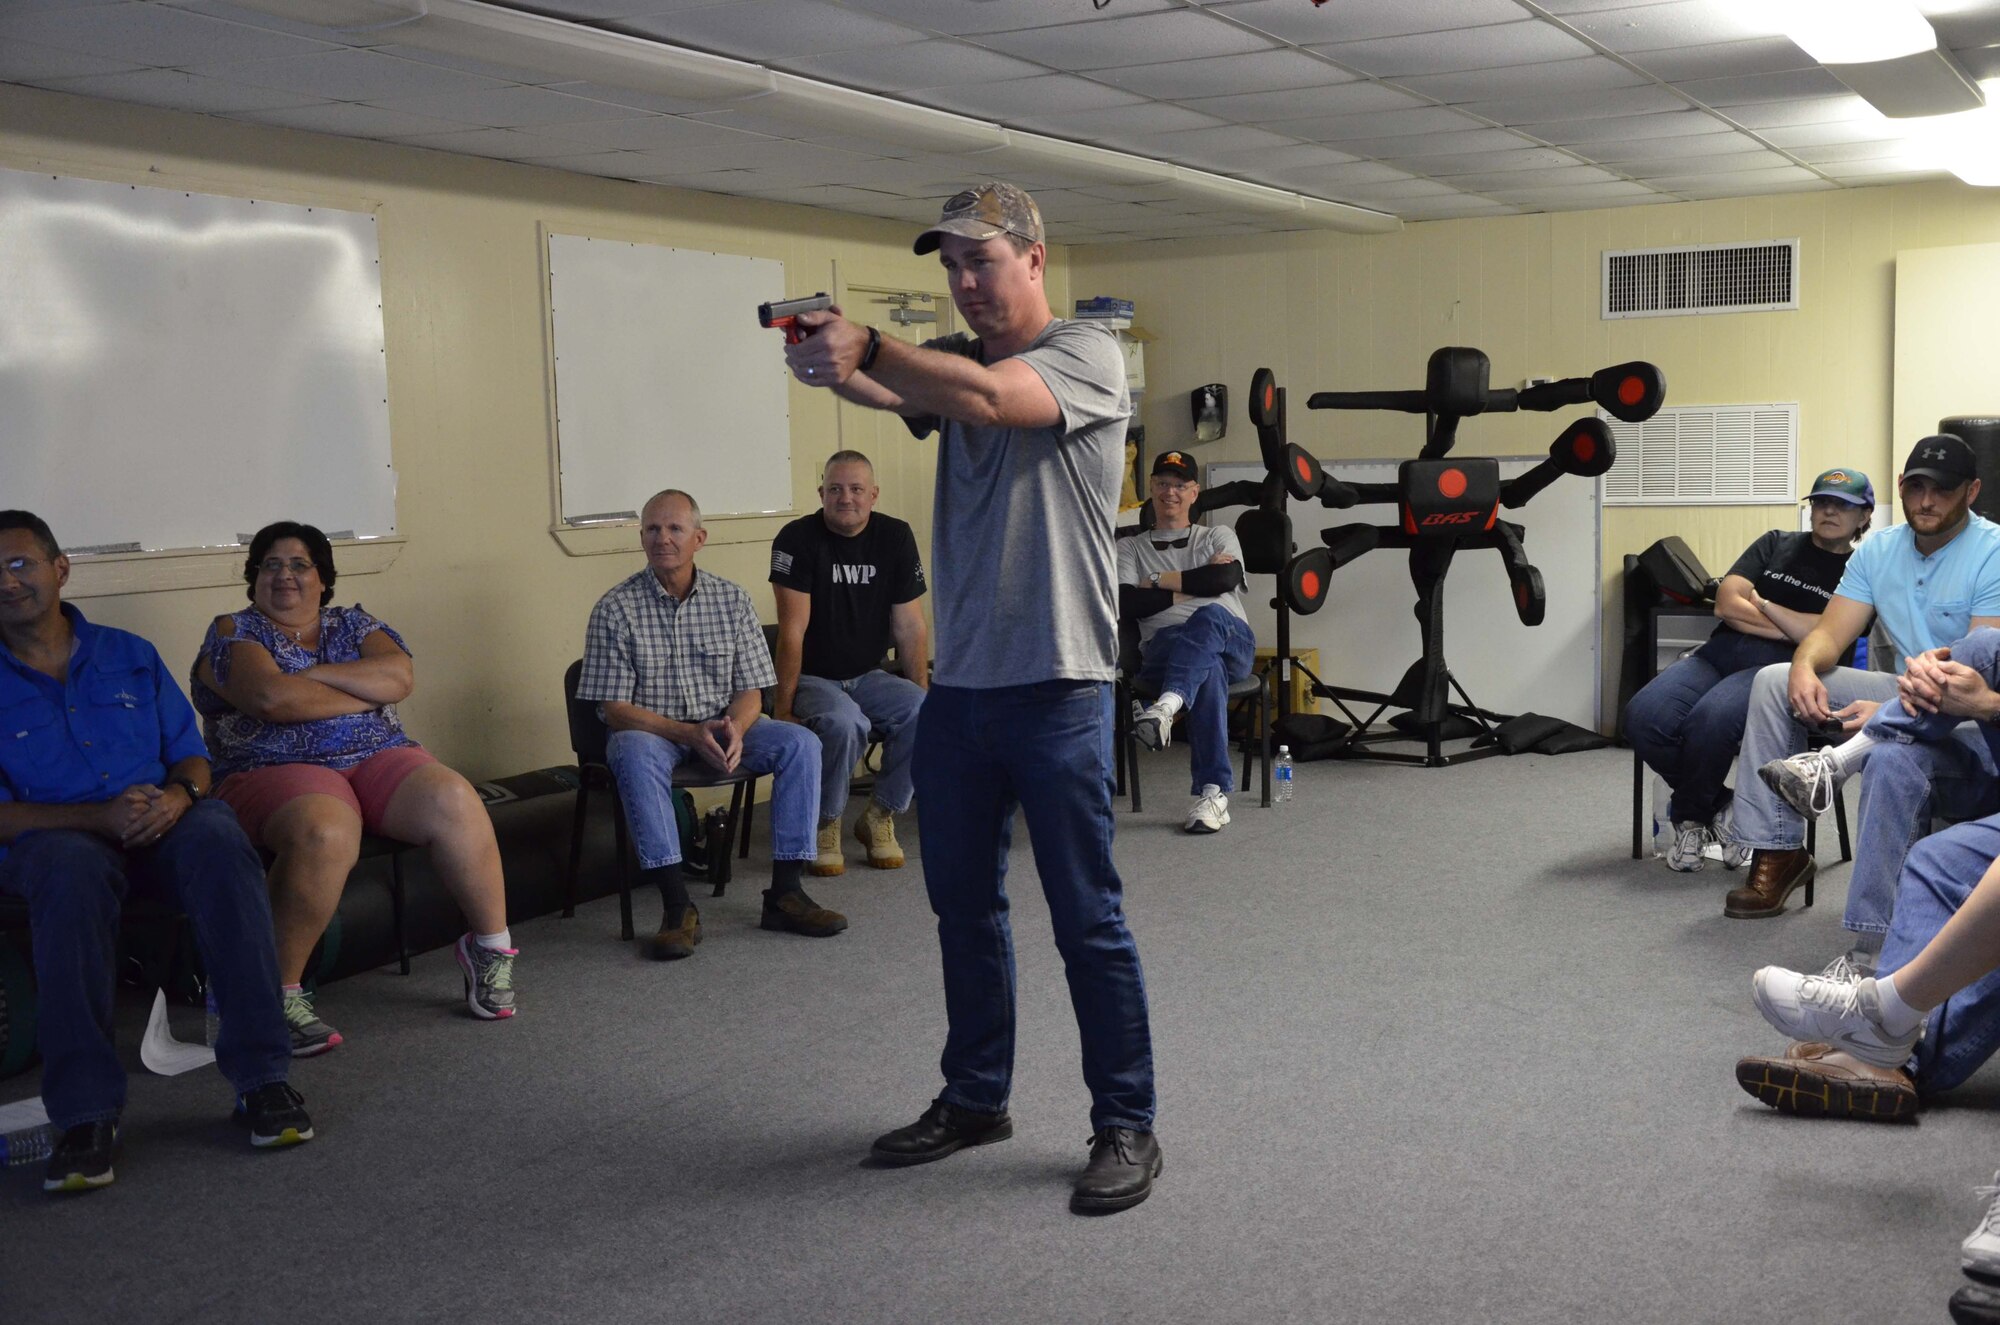 Col. Steven M. Gorski, commander of the Air Force Technical Applications Center, takes aim with a virtual handgun using a MILO simulator at the Brevard County Sheriff’s Office firing range.  Gorski and  24 members of his organization participated in BCSO’s Self Defense Through Tactical Shooting and Decision Making course March 25, 2017.  (U.S. Air Force photo by Susan A. Romano)